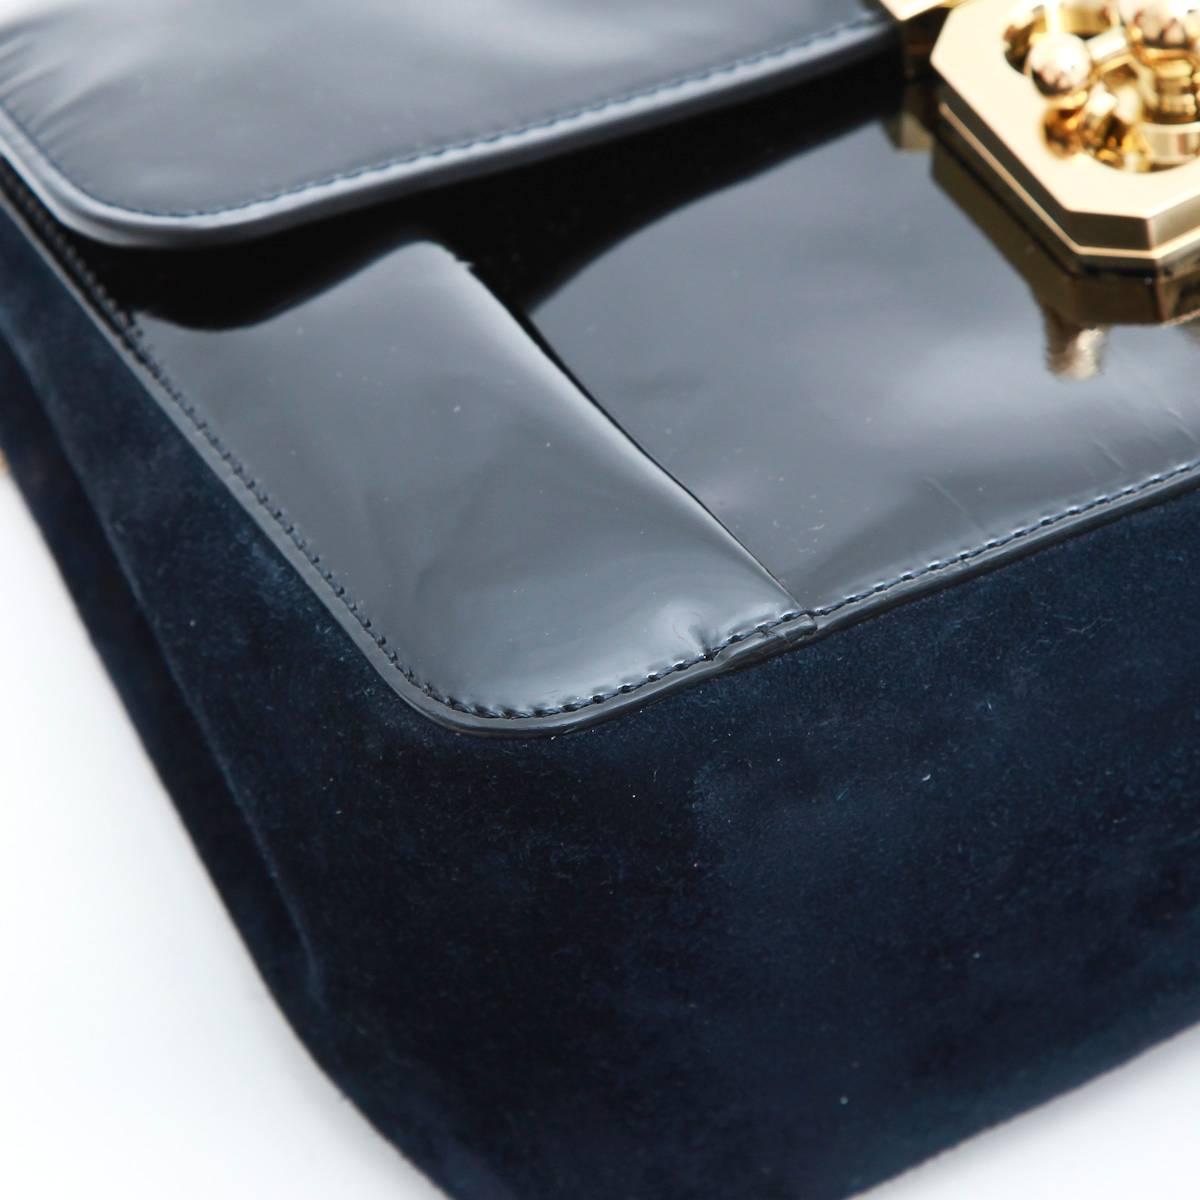 CHLOE Flap Bag in Navy Suede and Black Patent Leather 3